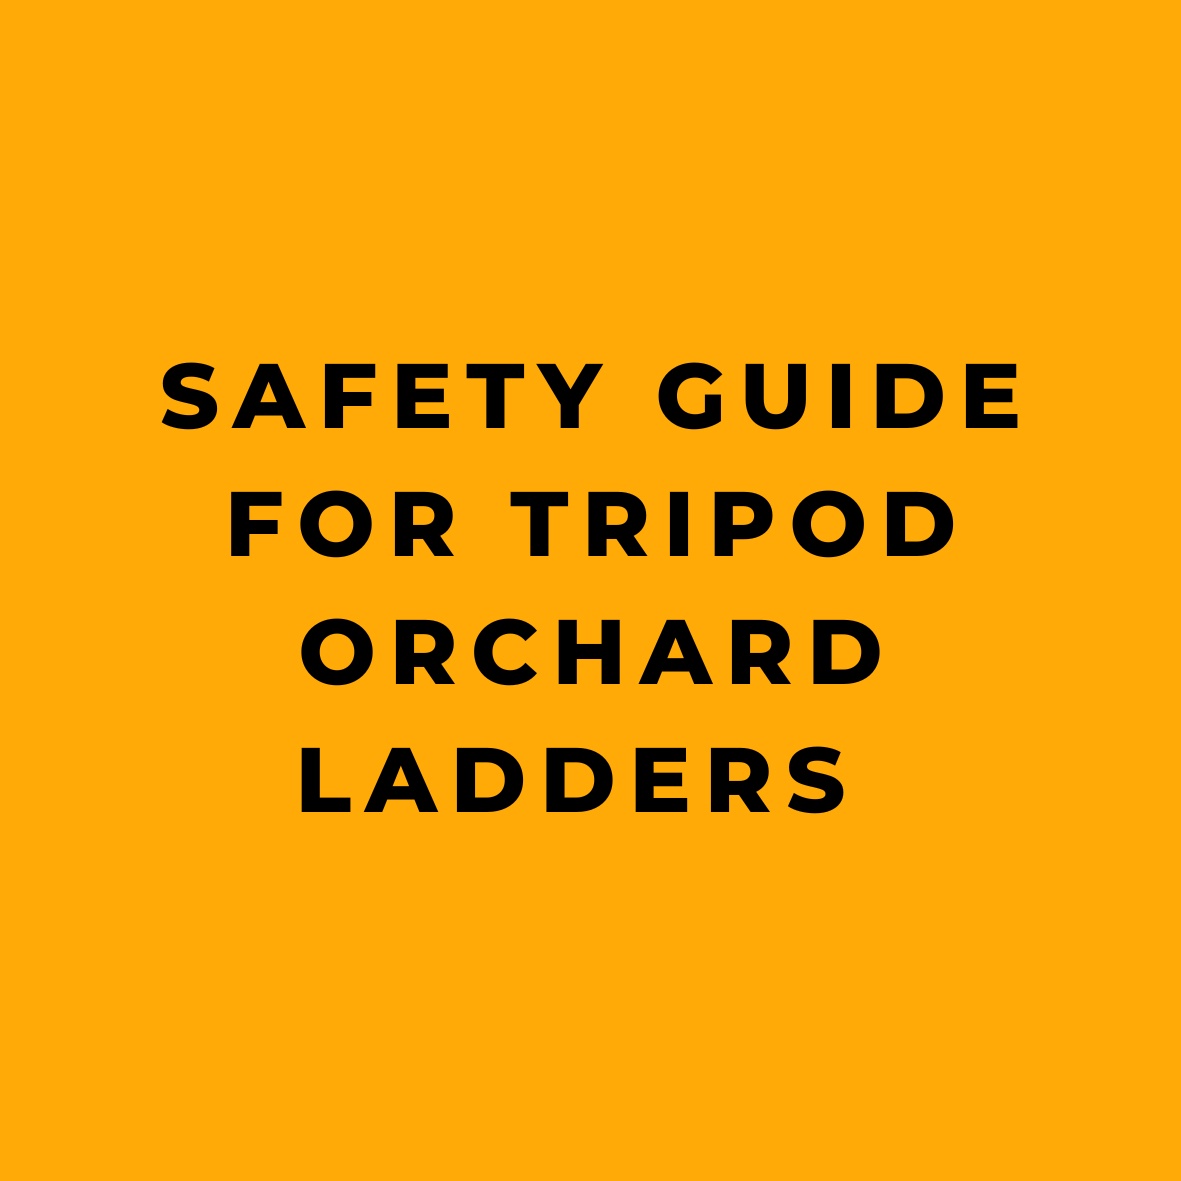 Safety Guide for Tripod Orchard Ladders